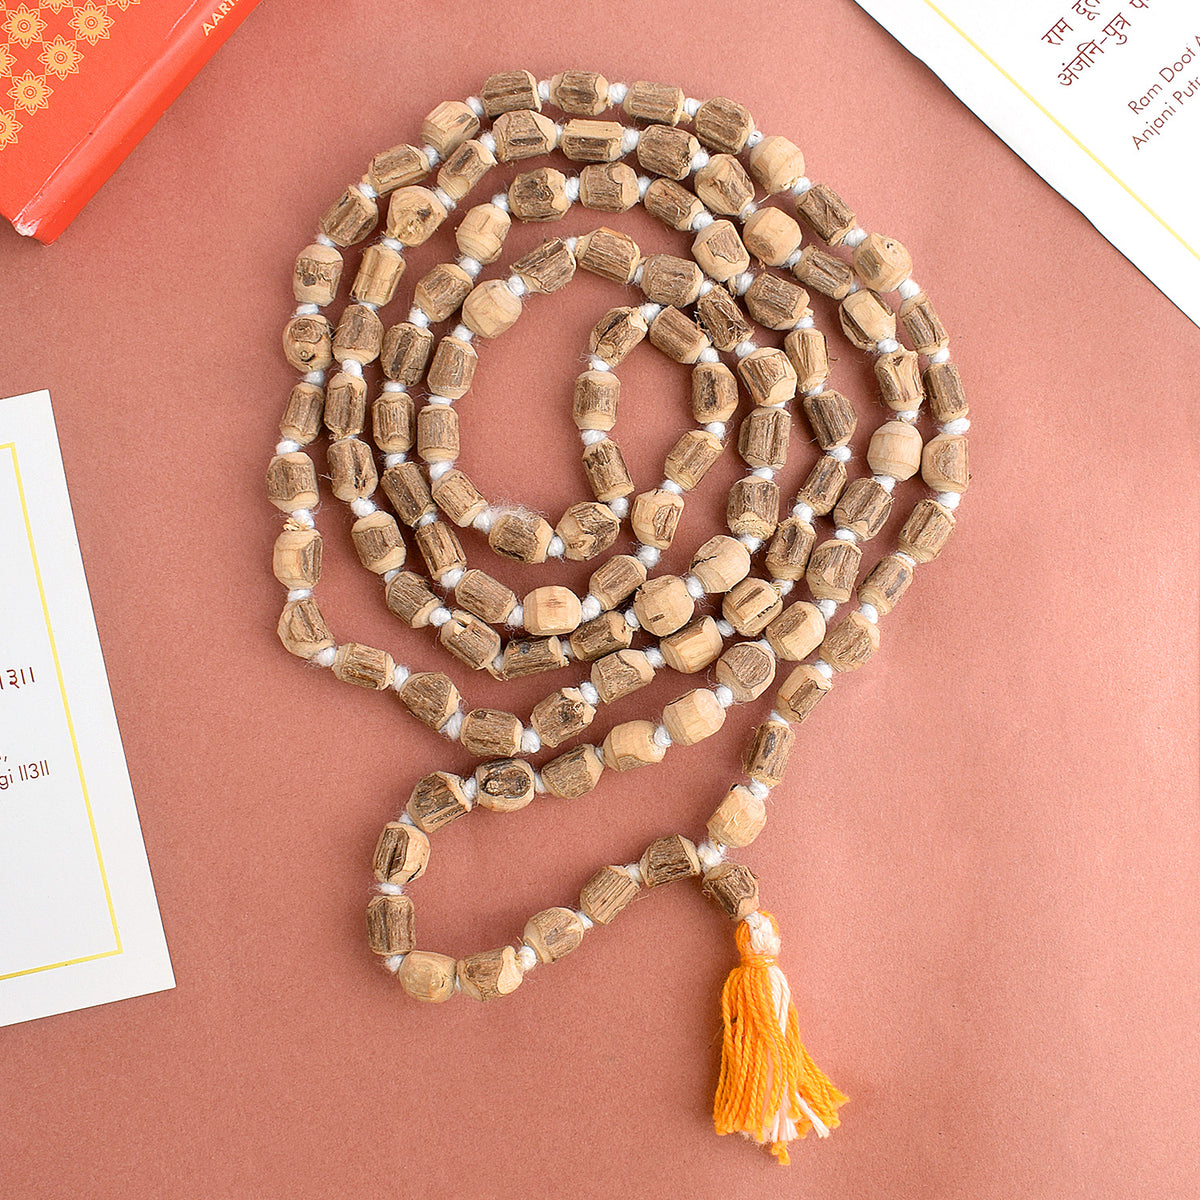 Stretchable 108 + 1 Tulsi Beads Jap Mala For Wearing and Mantra Japa -  Premium